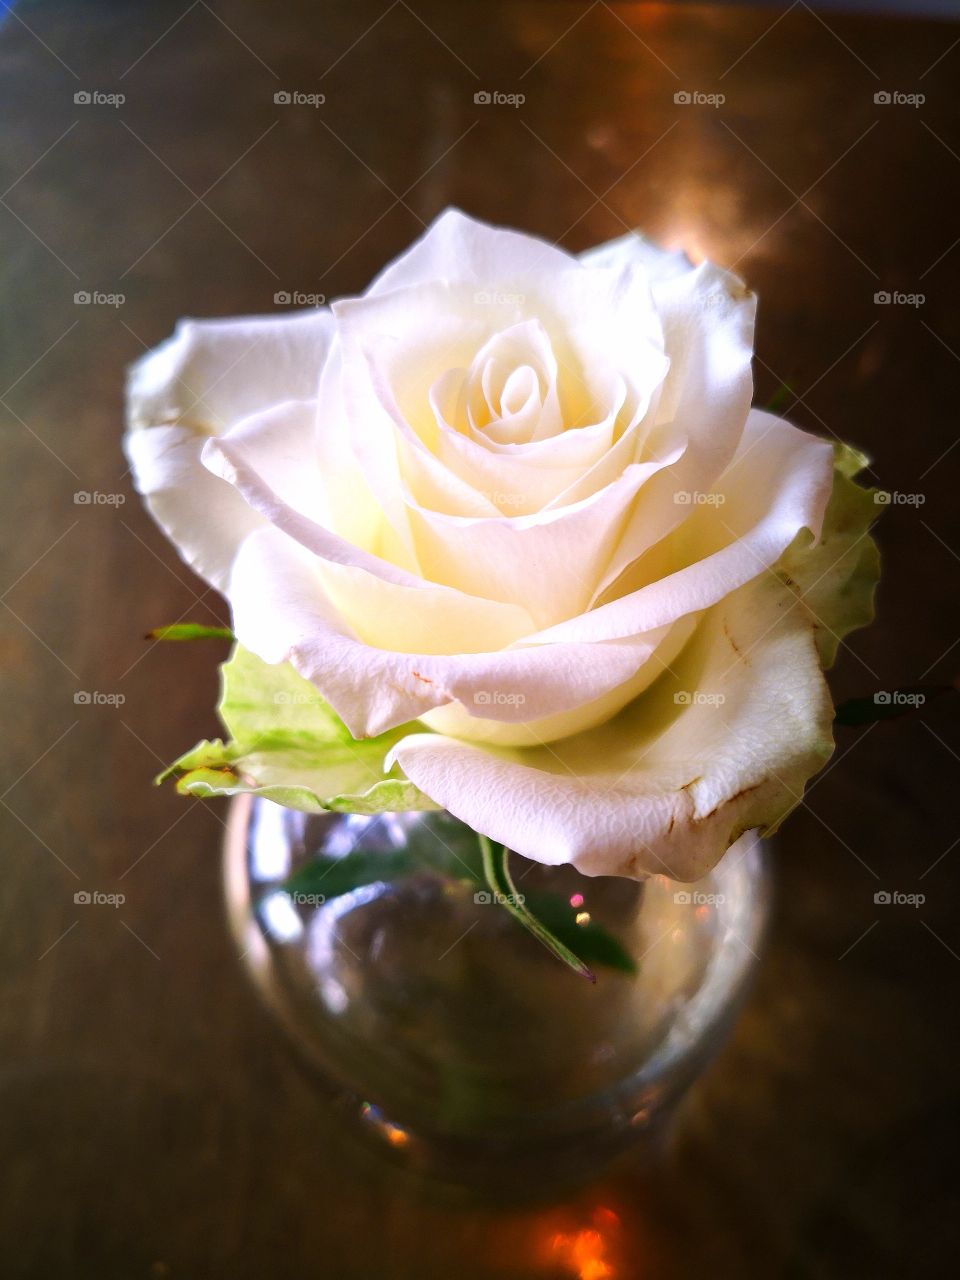 A white rose on my table.